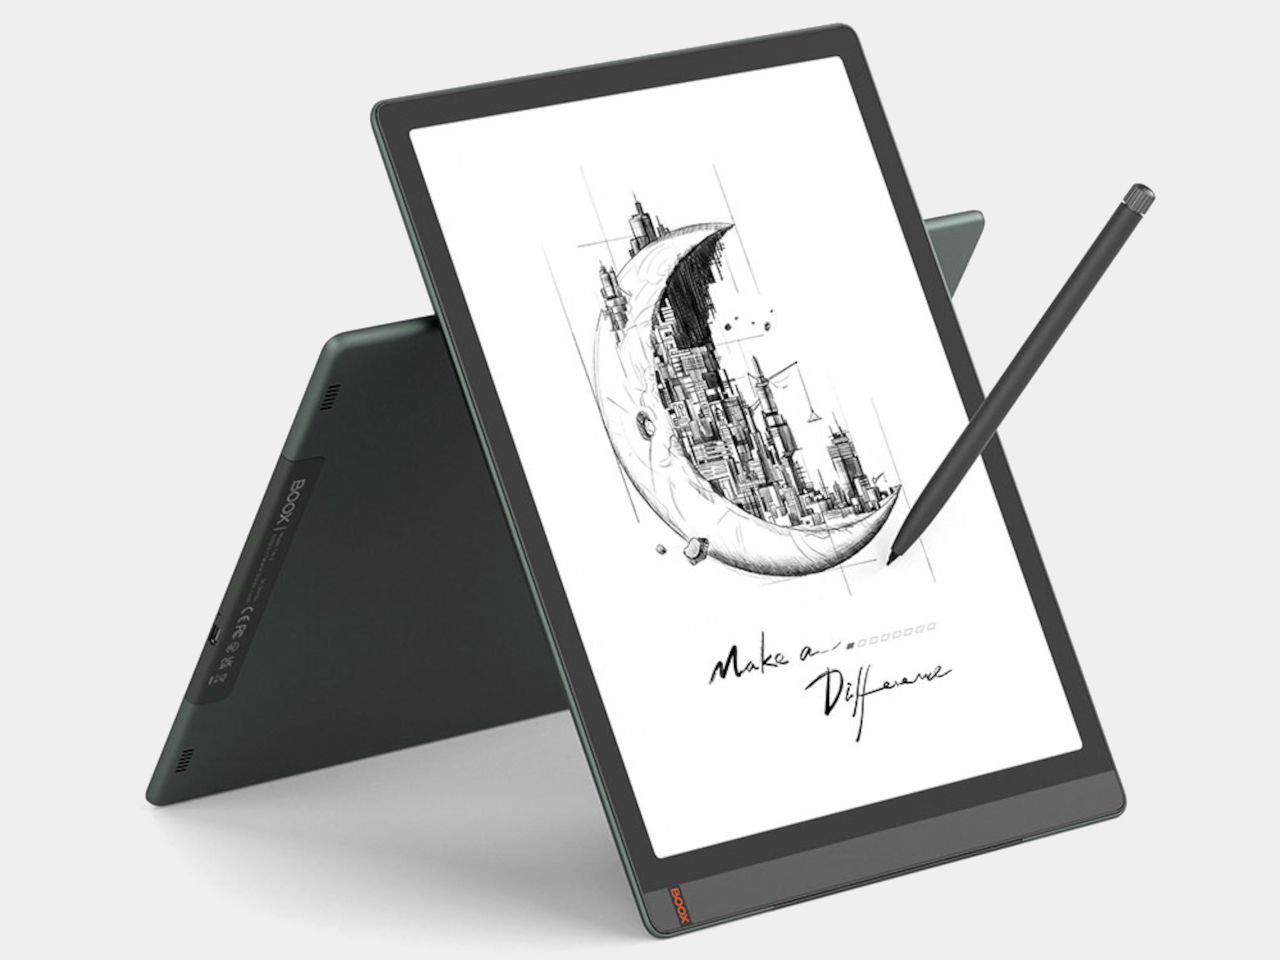 Onyx BOOX Tab X is an Android tablet with a giant E Ink screen